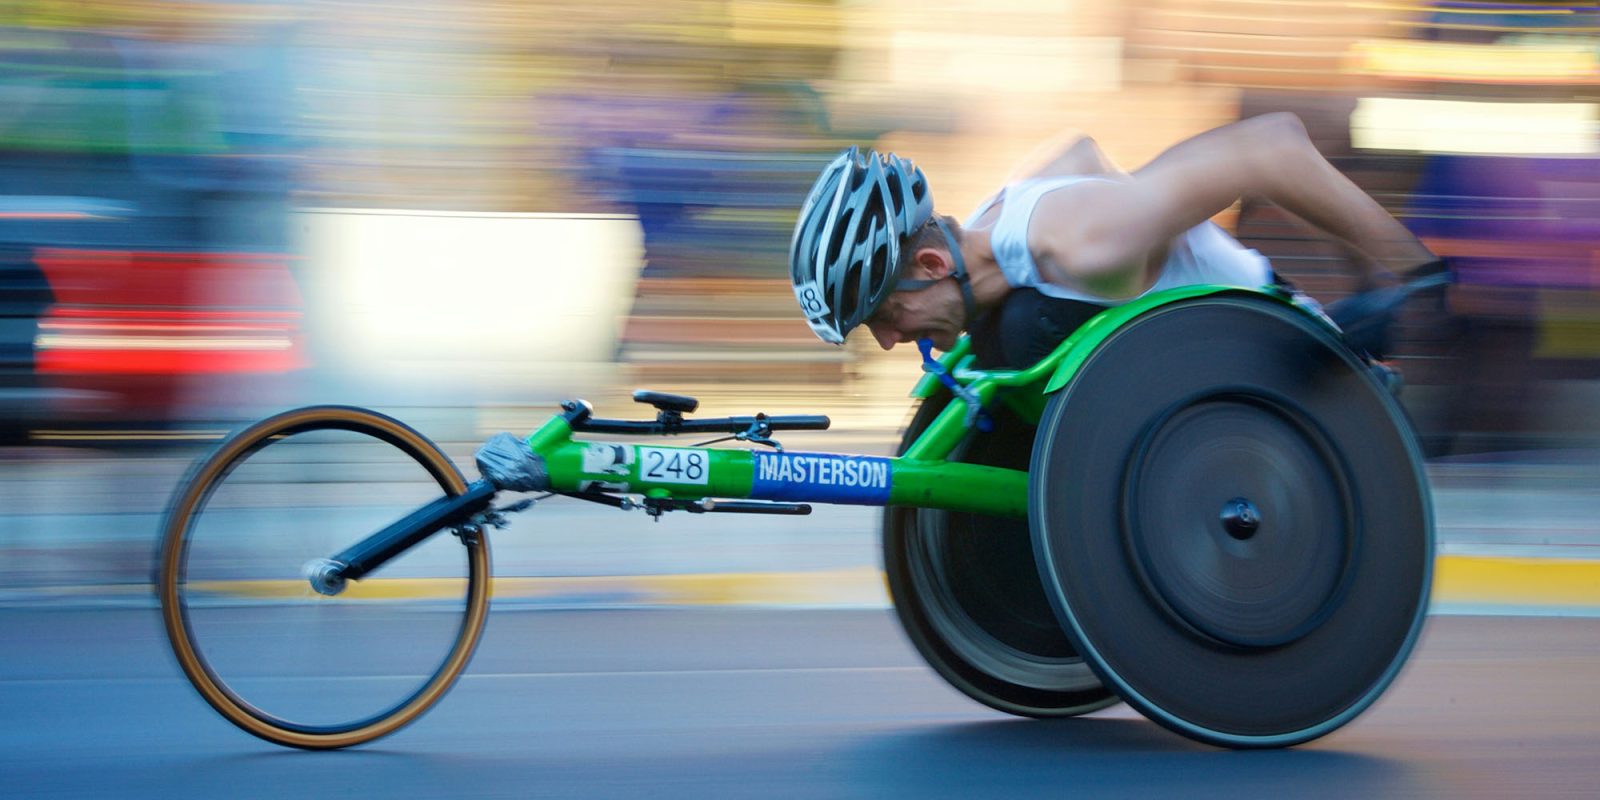 AI accessibility features could turbo-boost the Apple experience | Wheelchair user in the Chicago Marathon